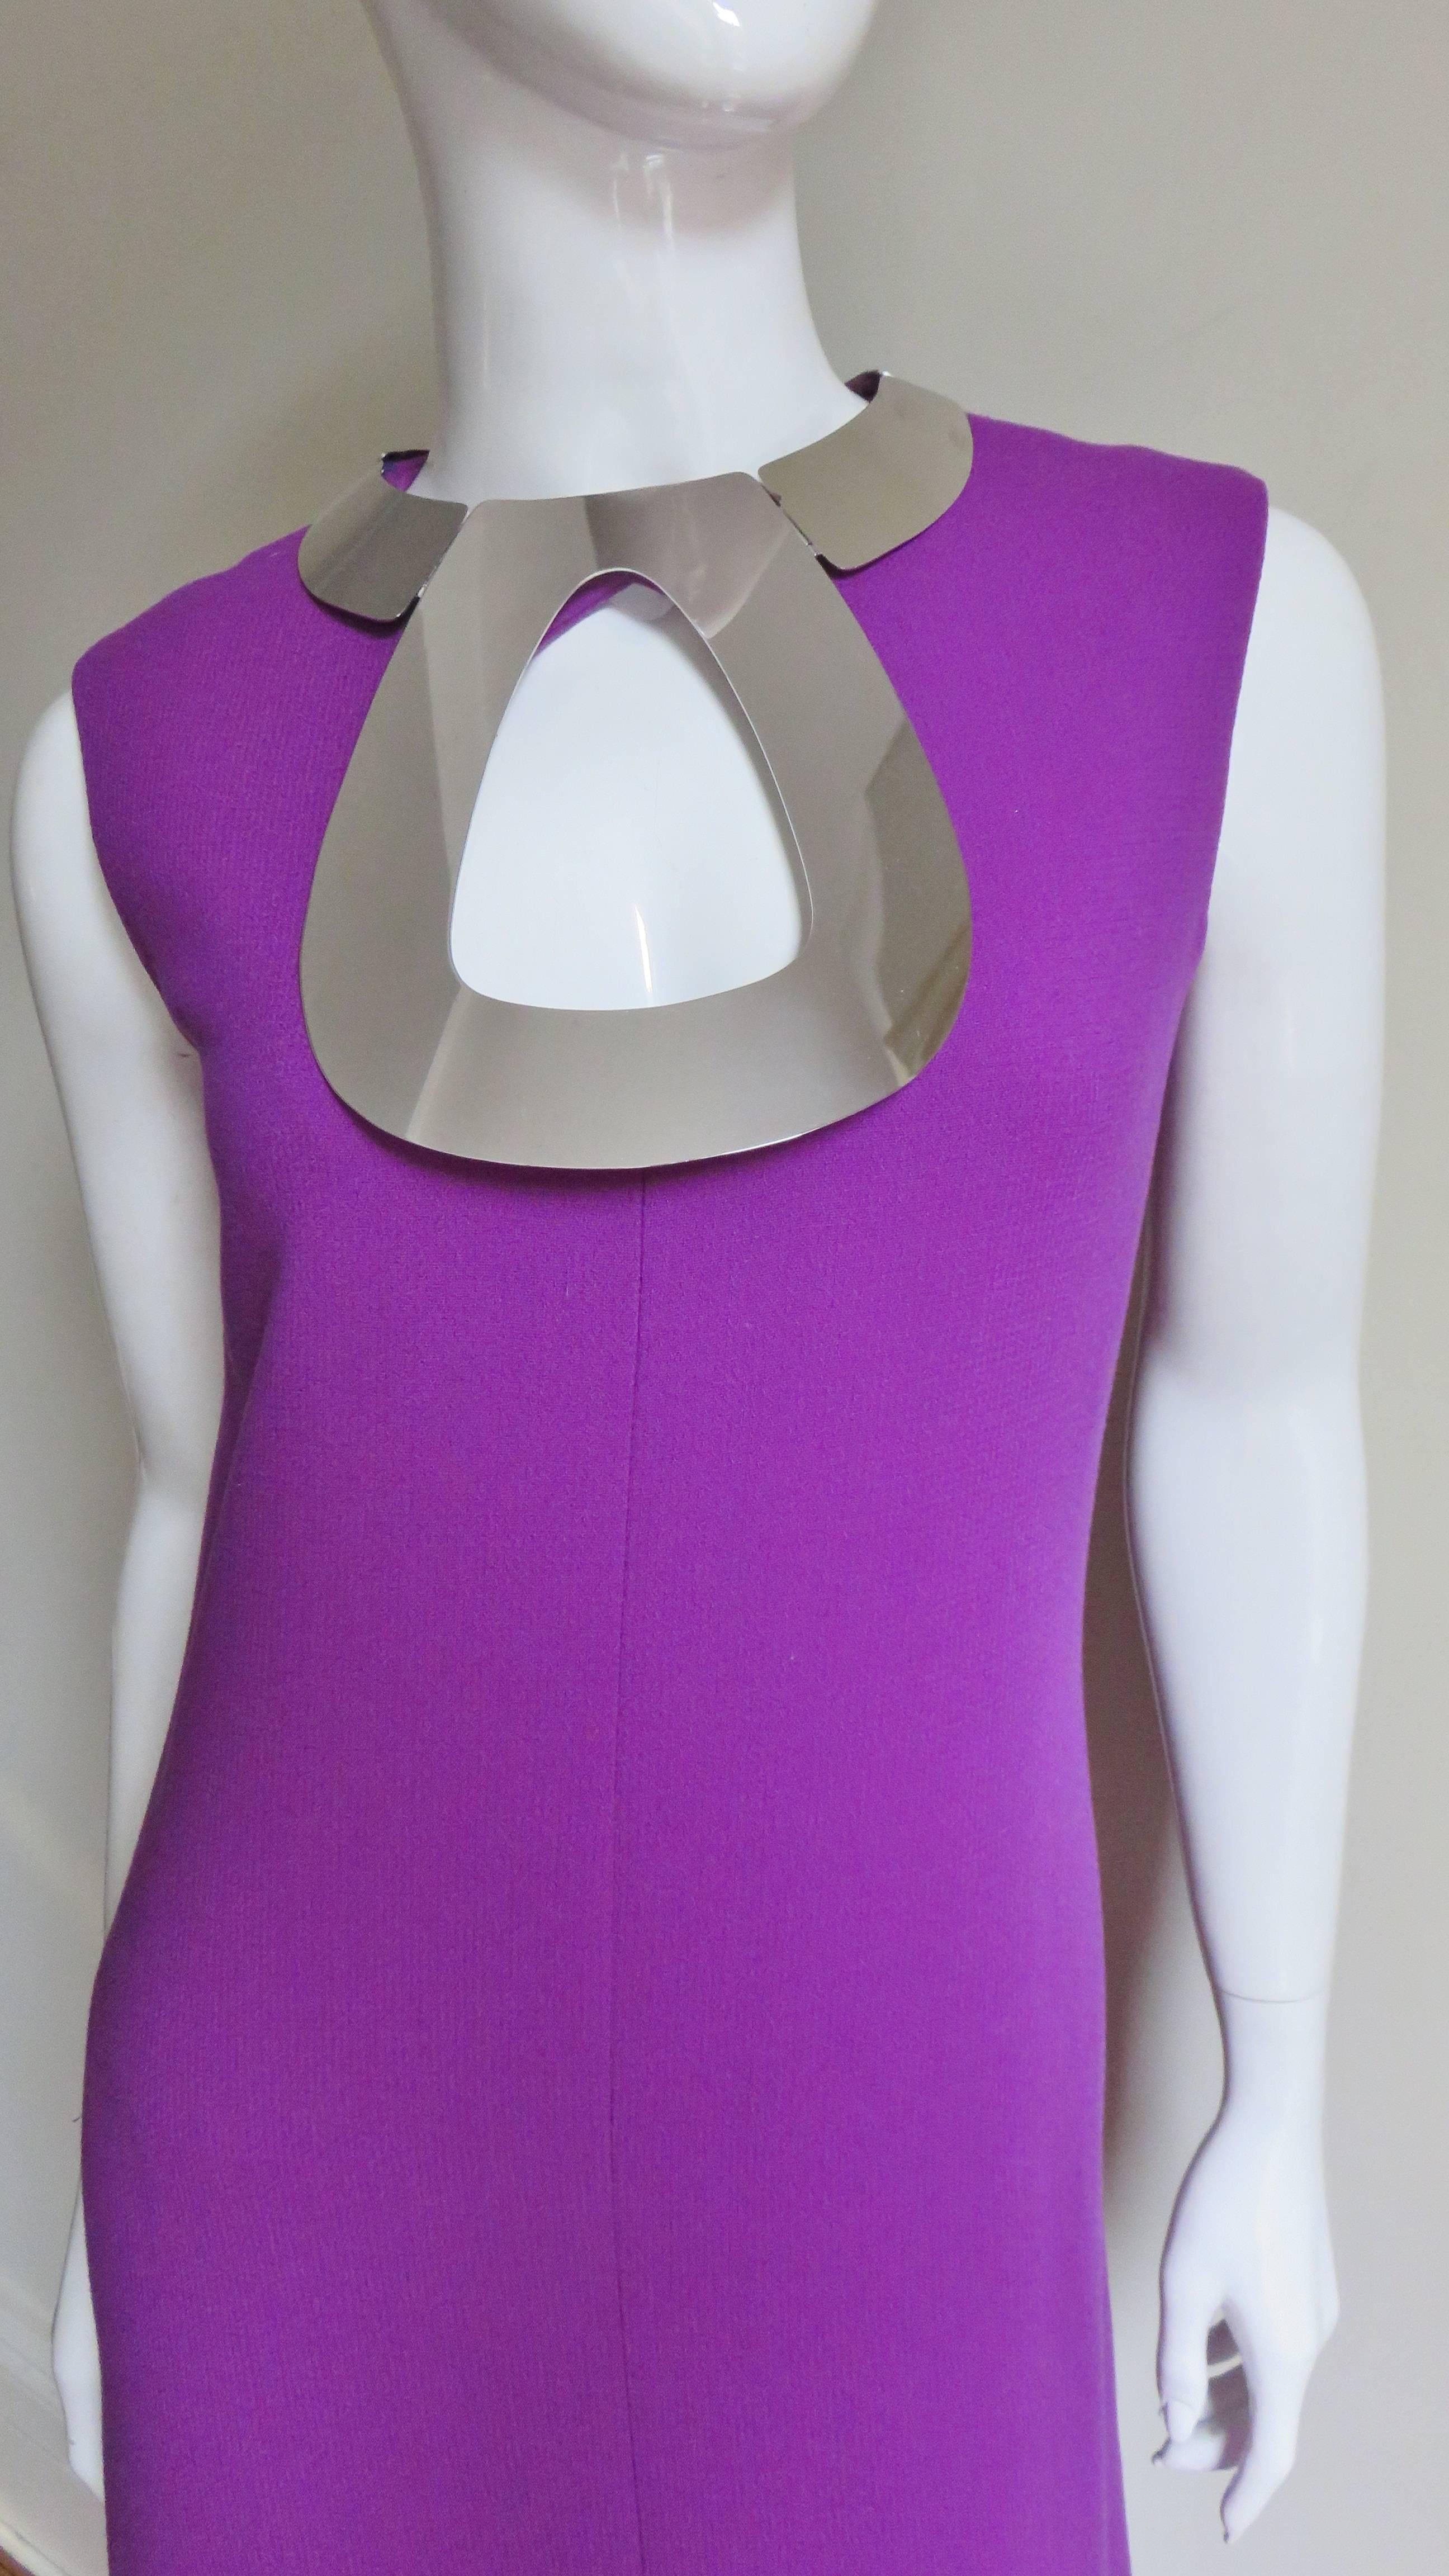  Pierre Cardin 1960s Iconic Metal Hardware Collar Dress In Good Condition For Sale In Water Mill, NY